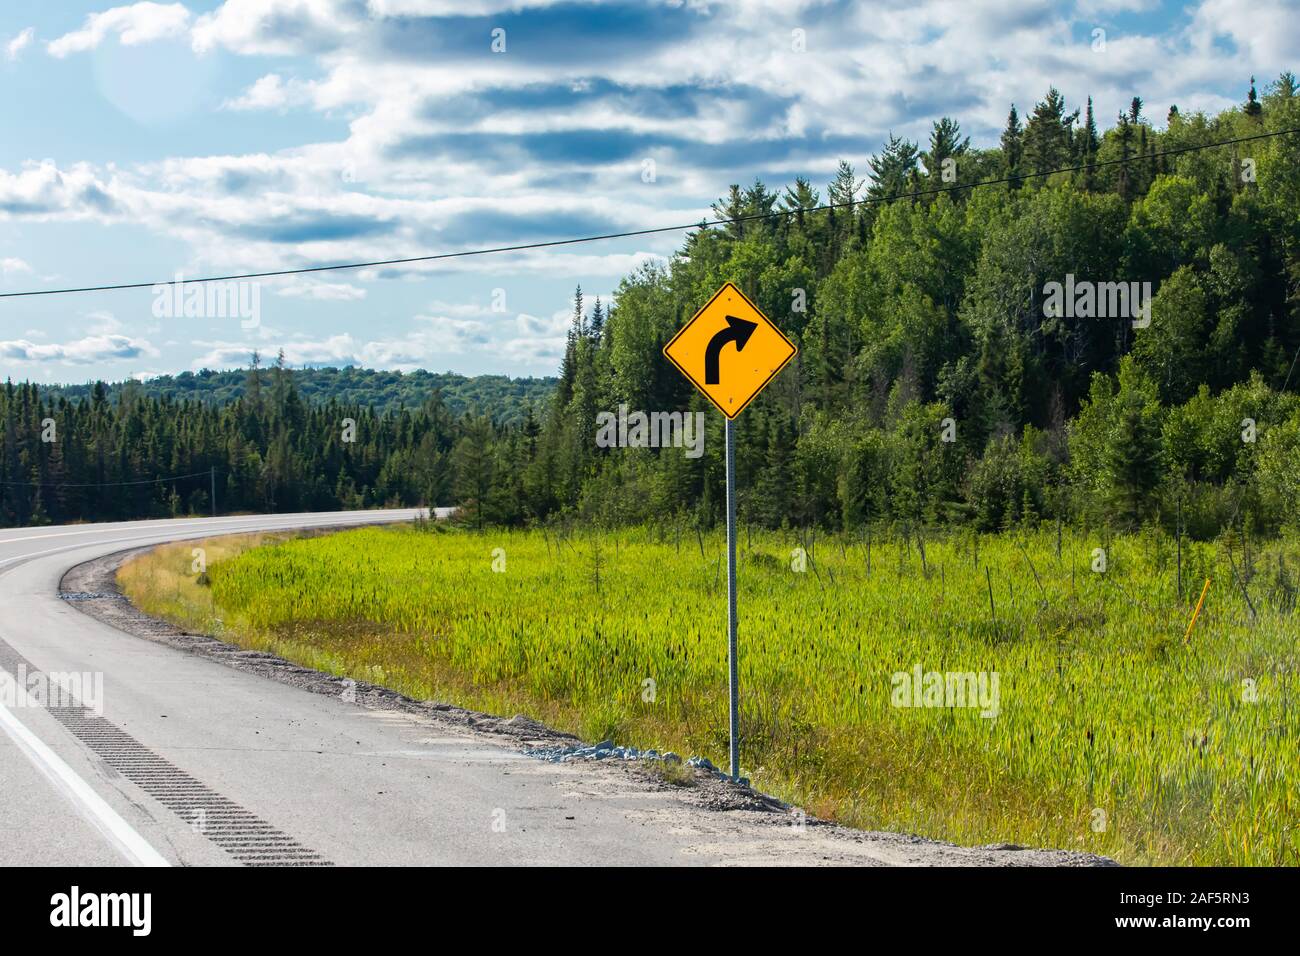 Warning For A Curve To The Right, Slight Bend Or Curve In The Road Ahead,  Warning Road Signs, In Selective Focus View With Forest Trees Background  Stock Photo, Picture and Royalty Free